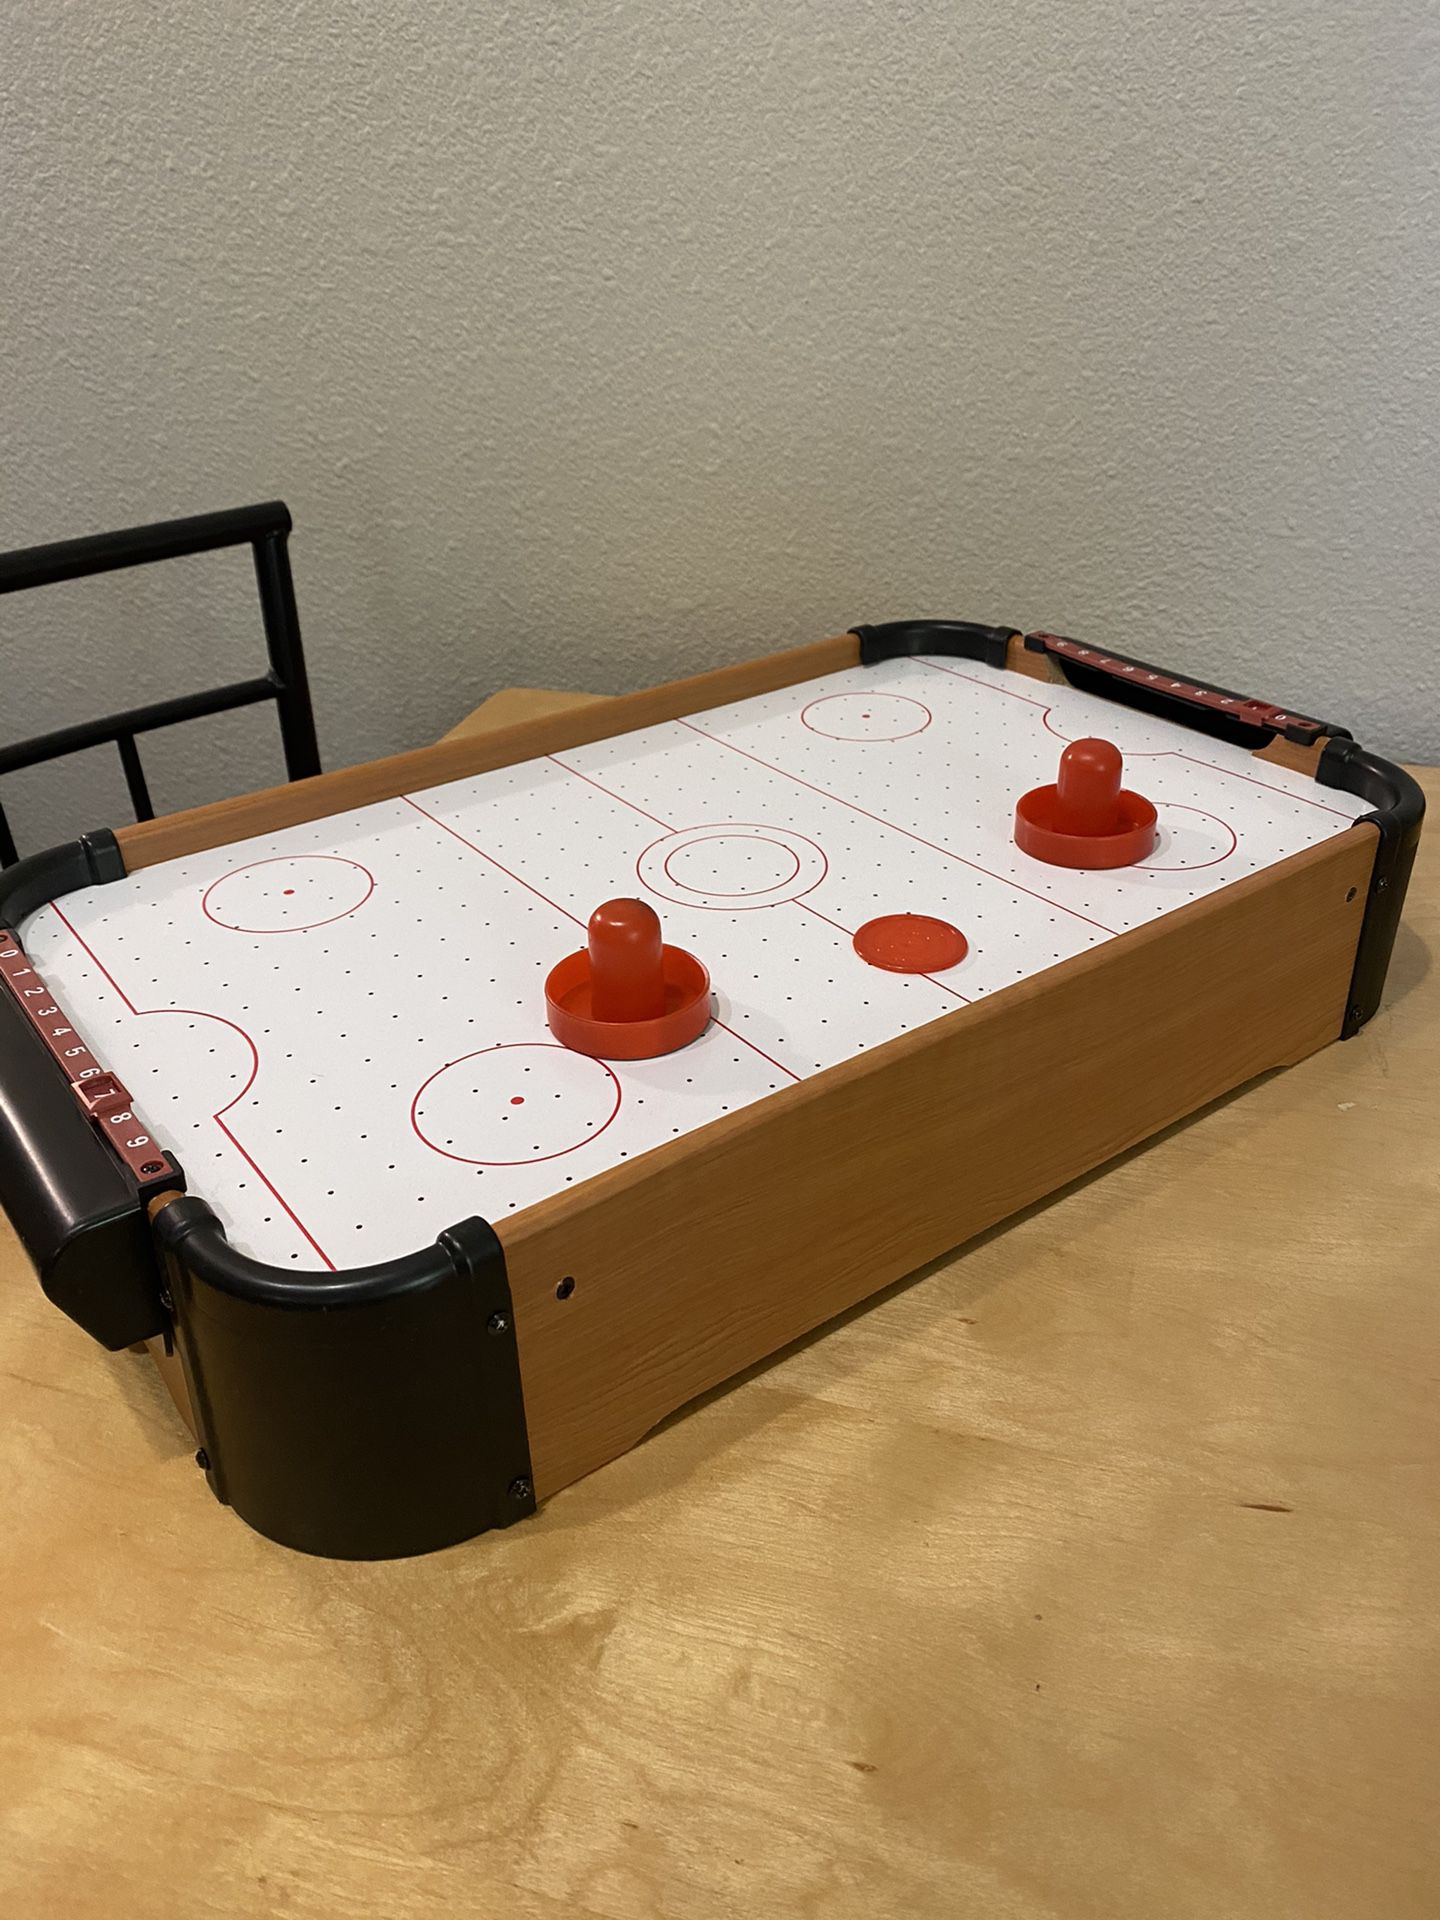 Table Top Air Hockey Table Battery powered